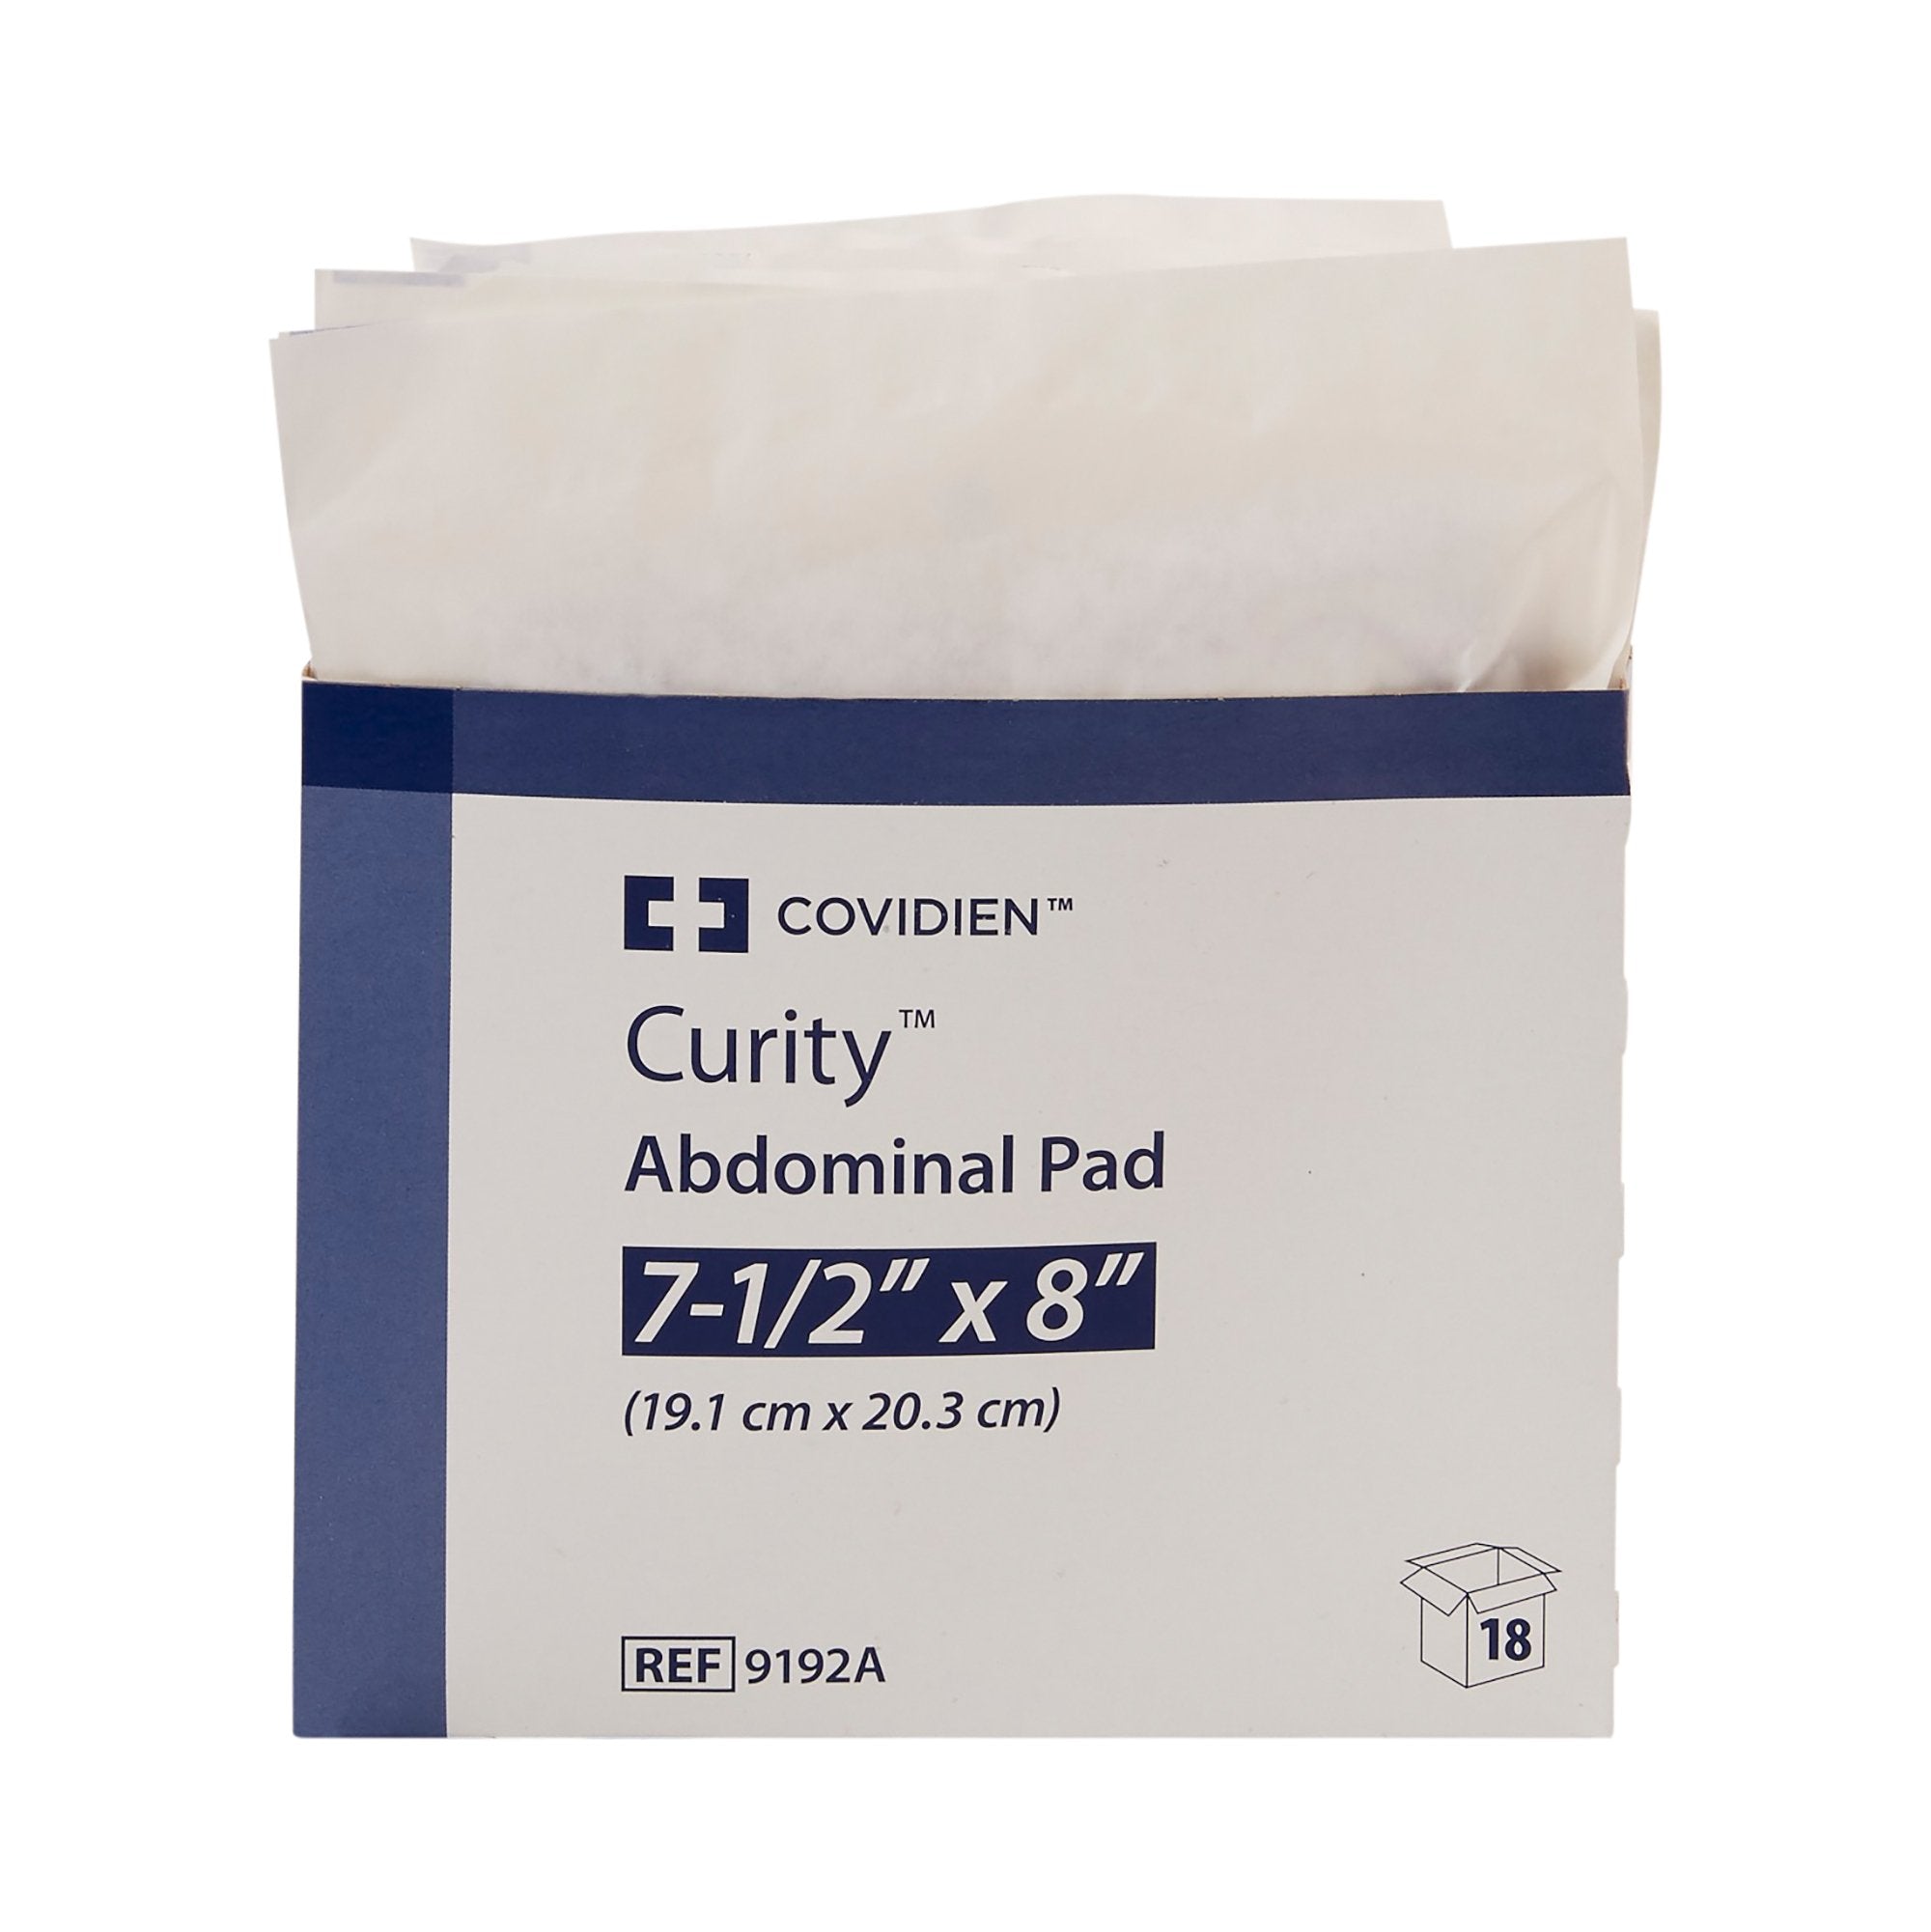 Abdominal Pad Curity™ 7-1/2 X 8 Inch 1 per Pack Sterile Rectangle